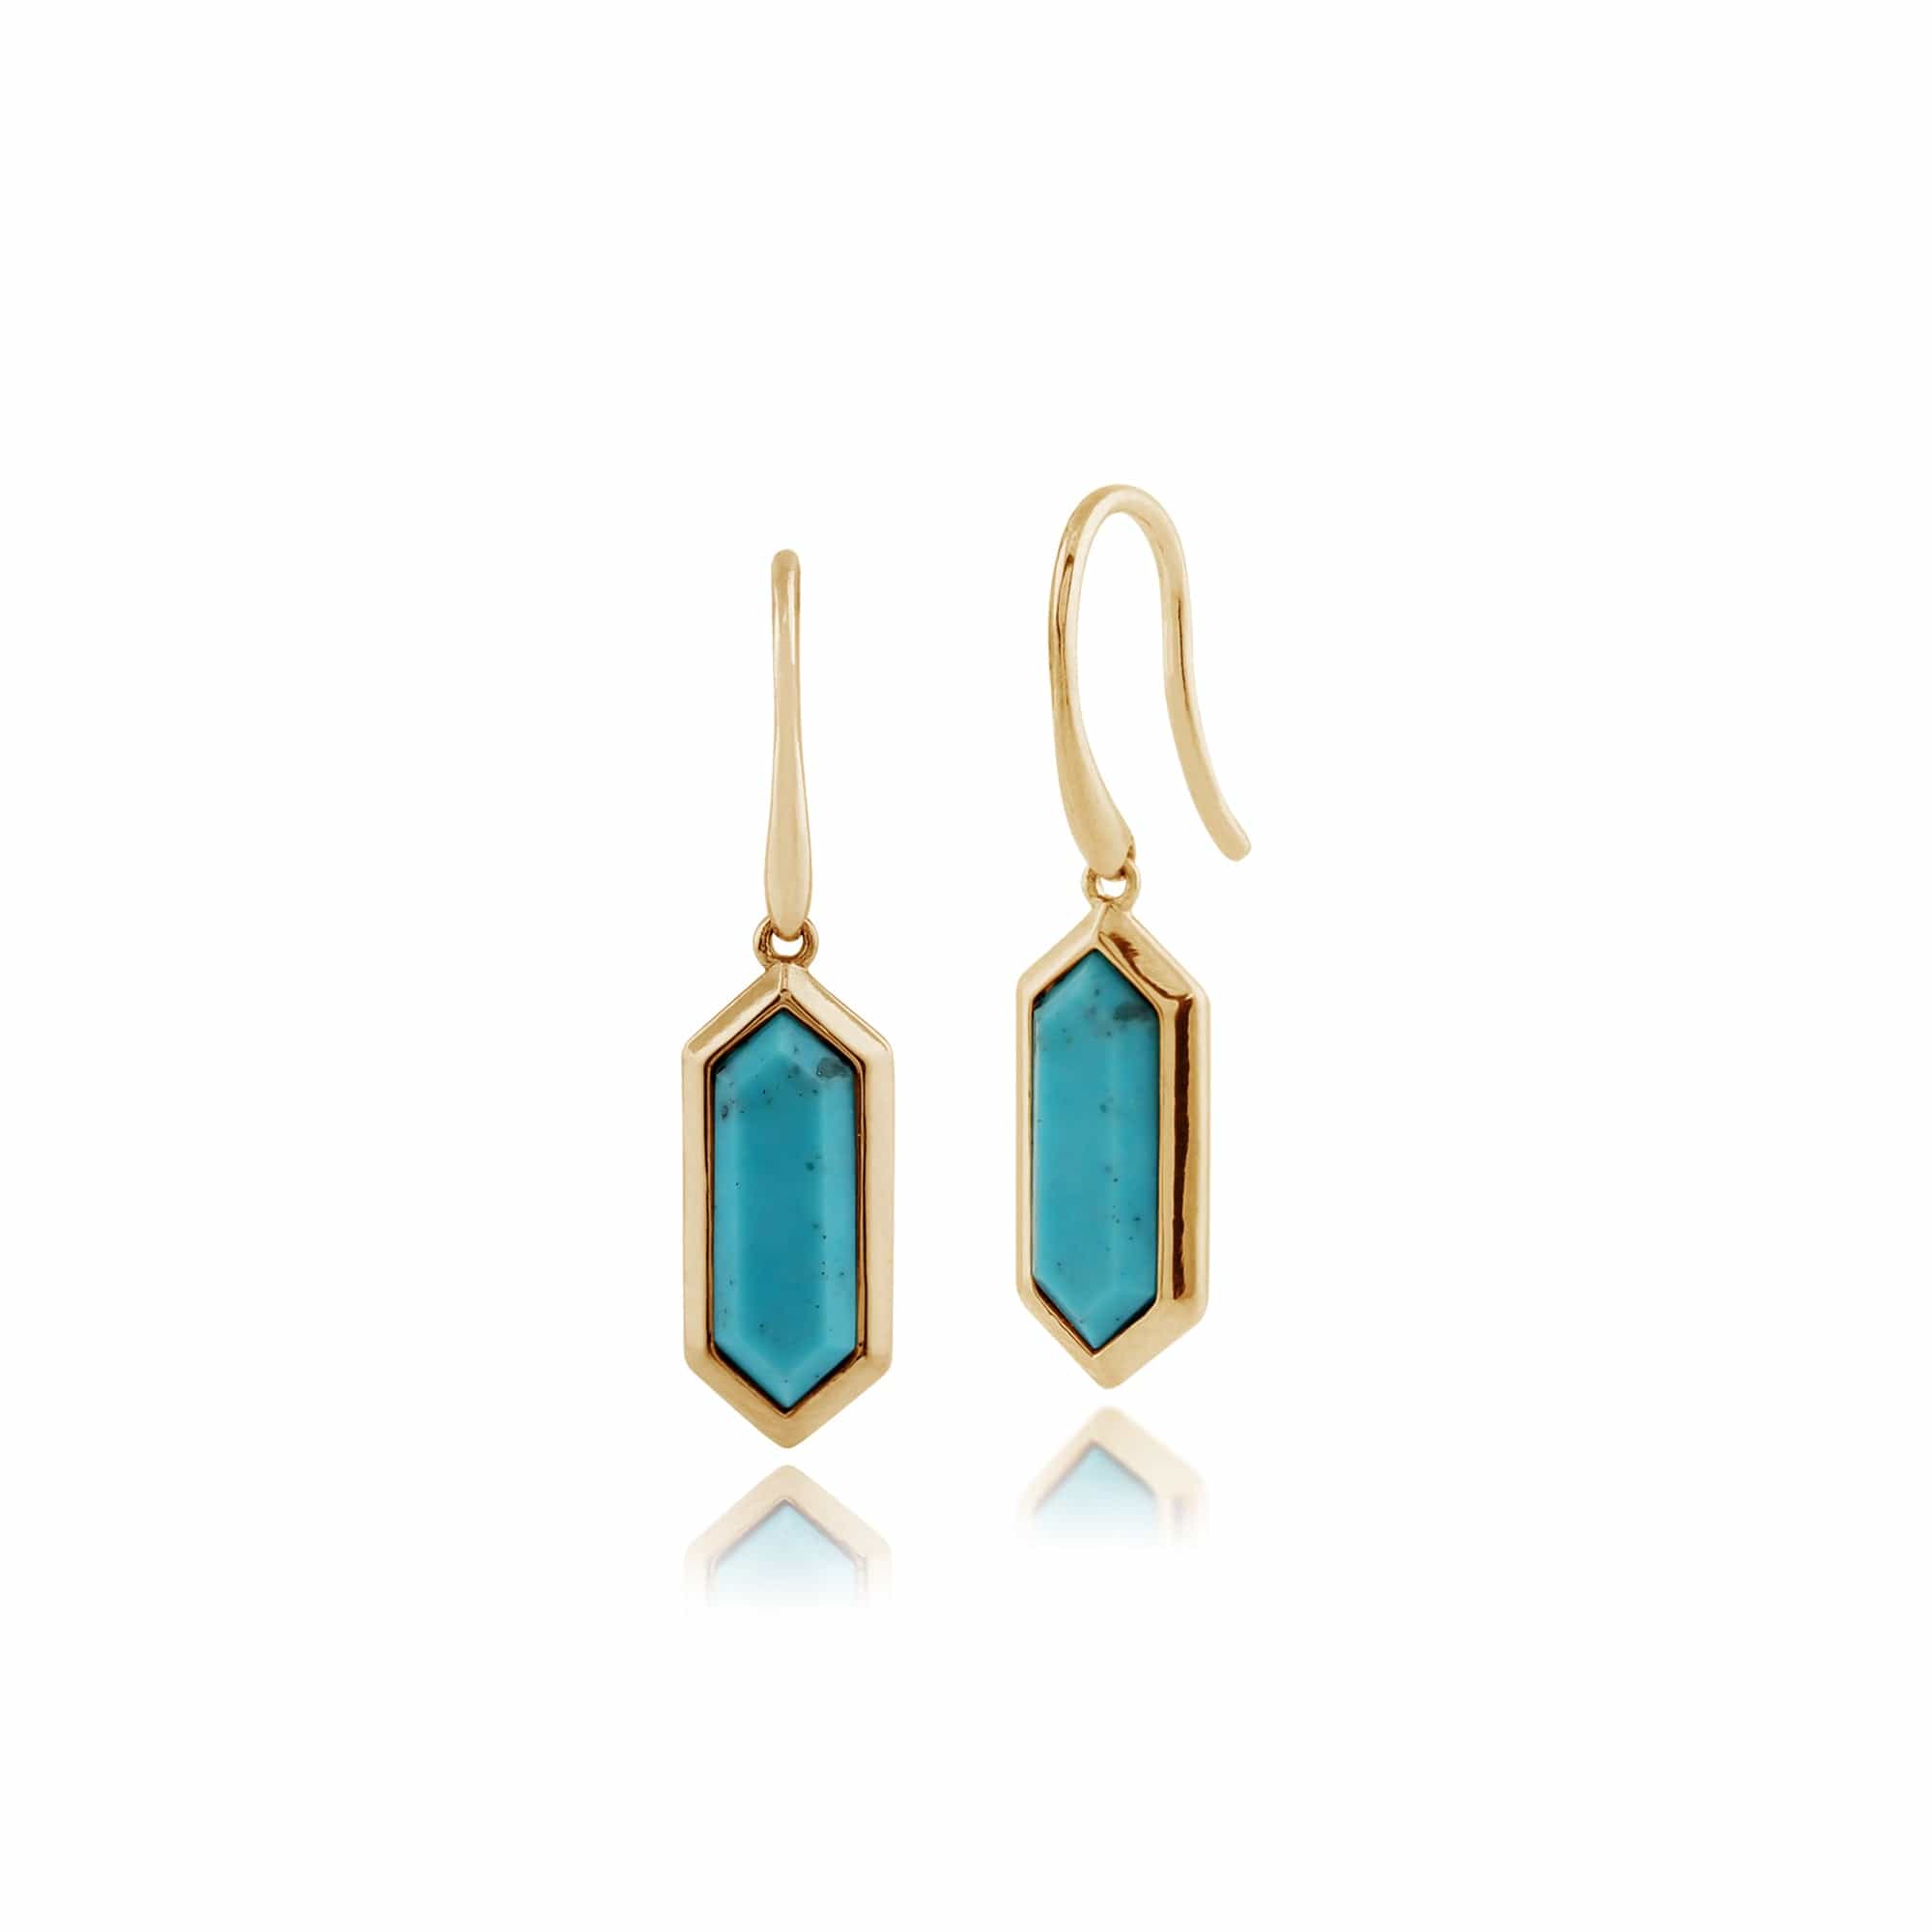 Geometric Hexagon Turquoise Prism Drop Earrings in Gold Plated Silver